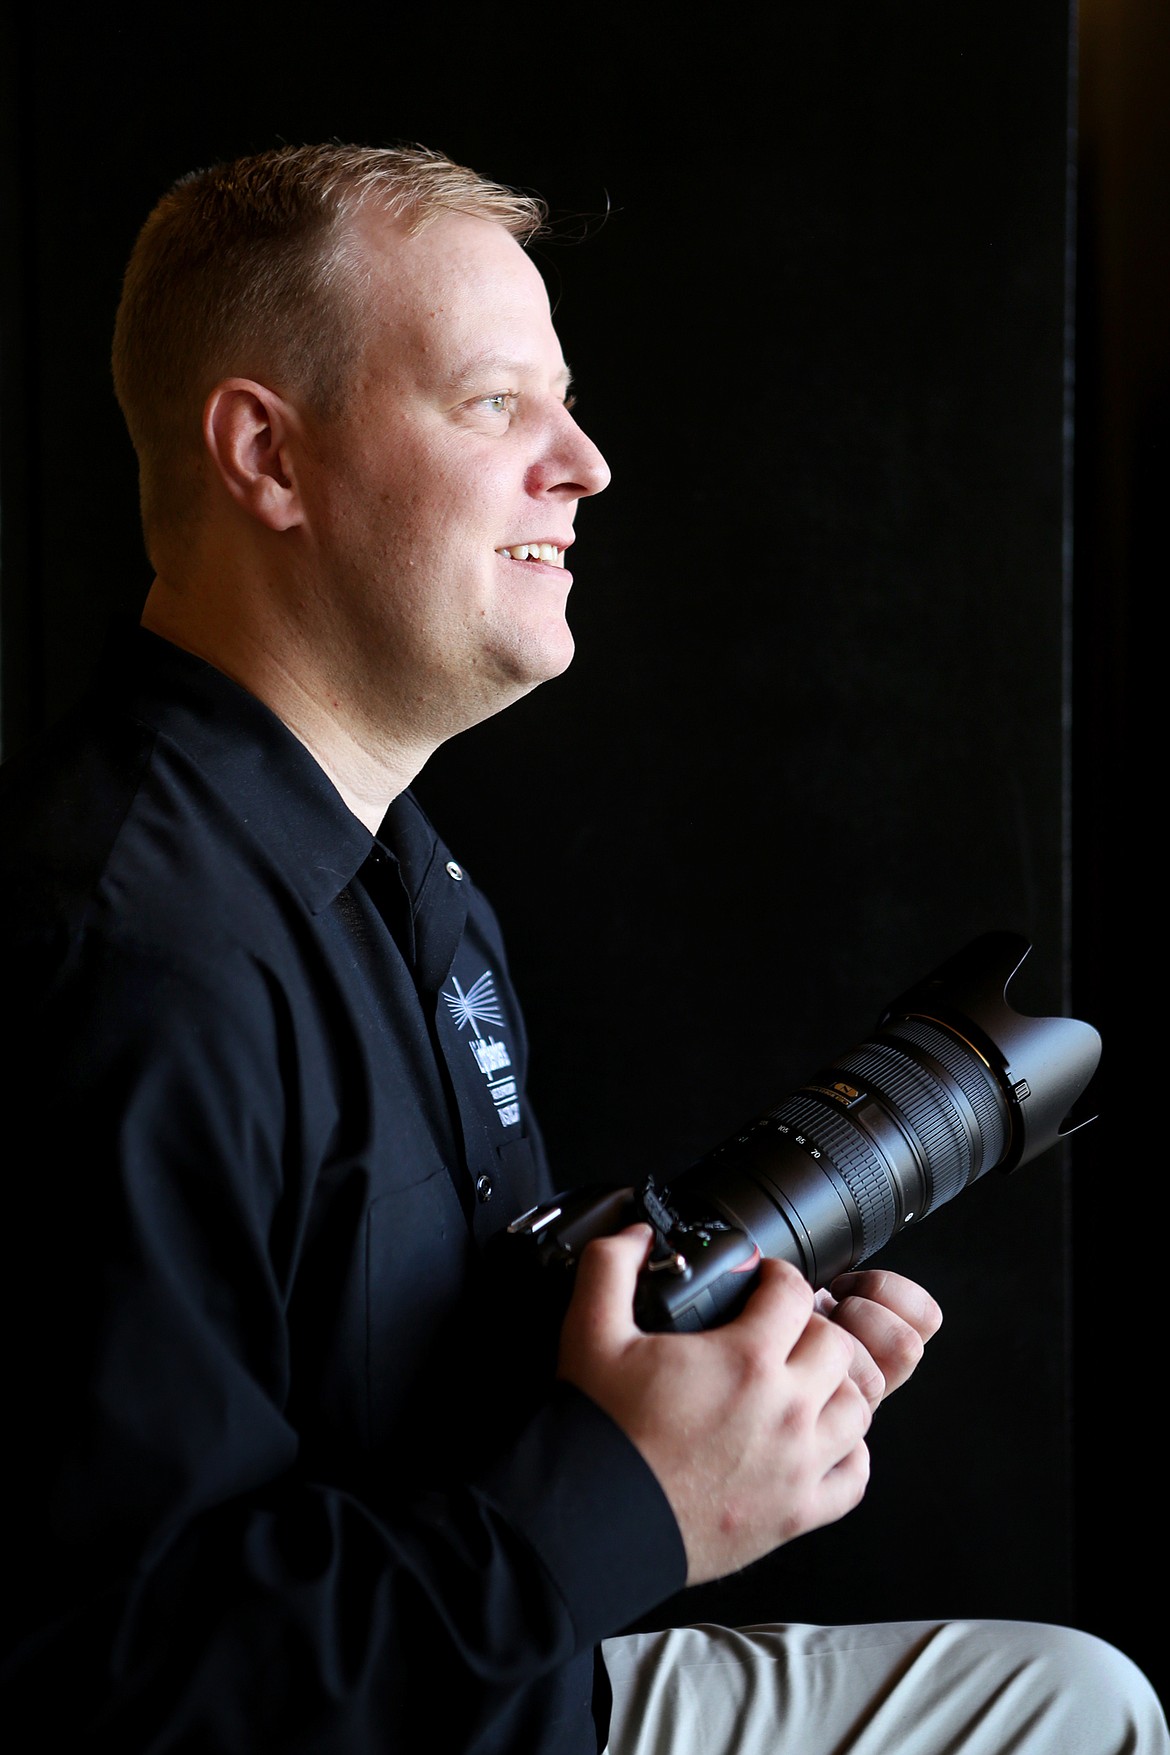 Marine Corps veteran Jon Vander Ark will instruct the Kalispell LightBenders course, beginning July 8 at the Kalispell Vet Center. Vander Ark discovered photography helped him reconnect with his family after four years of military service. (Mackenzie Reiss/Daily Inter Lake)